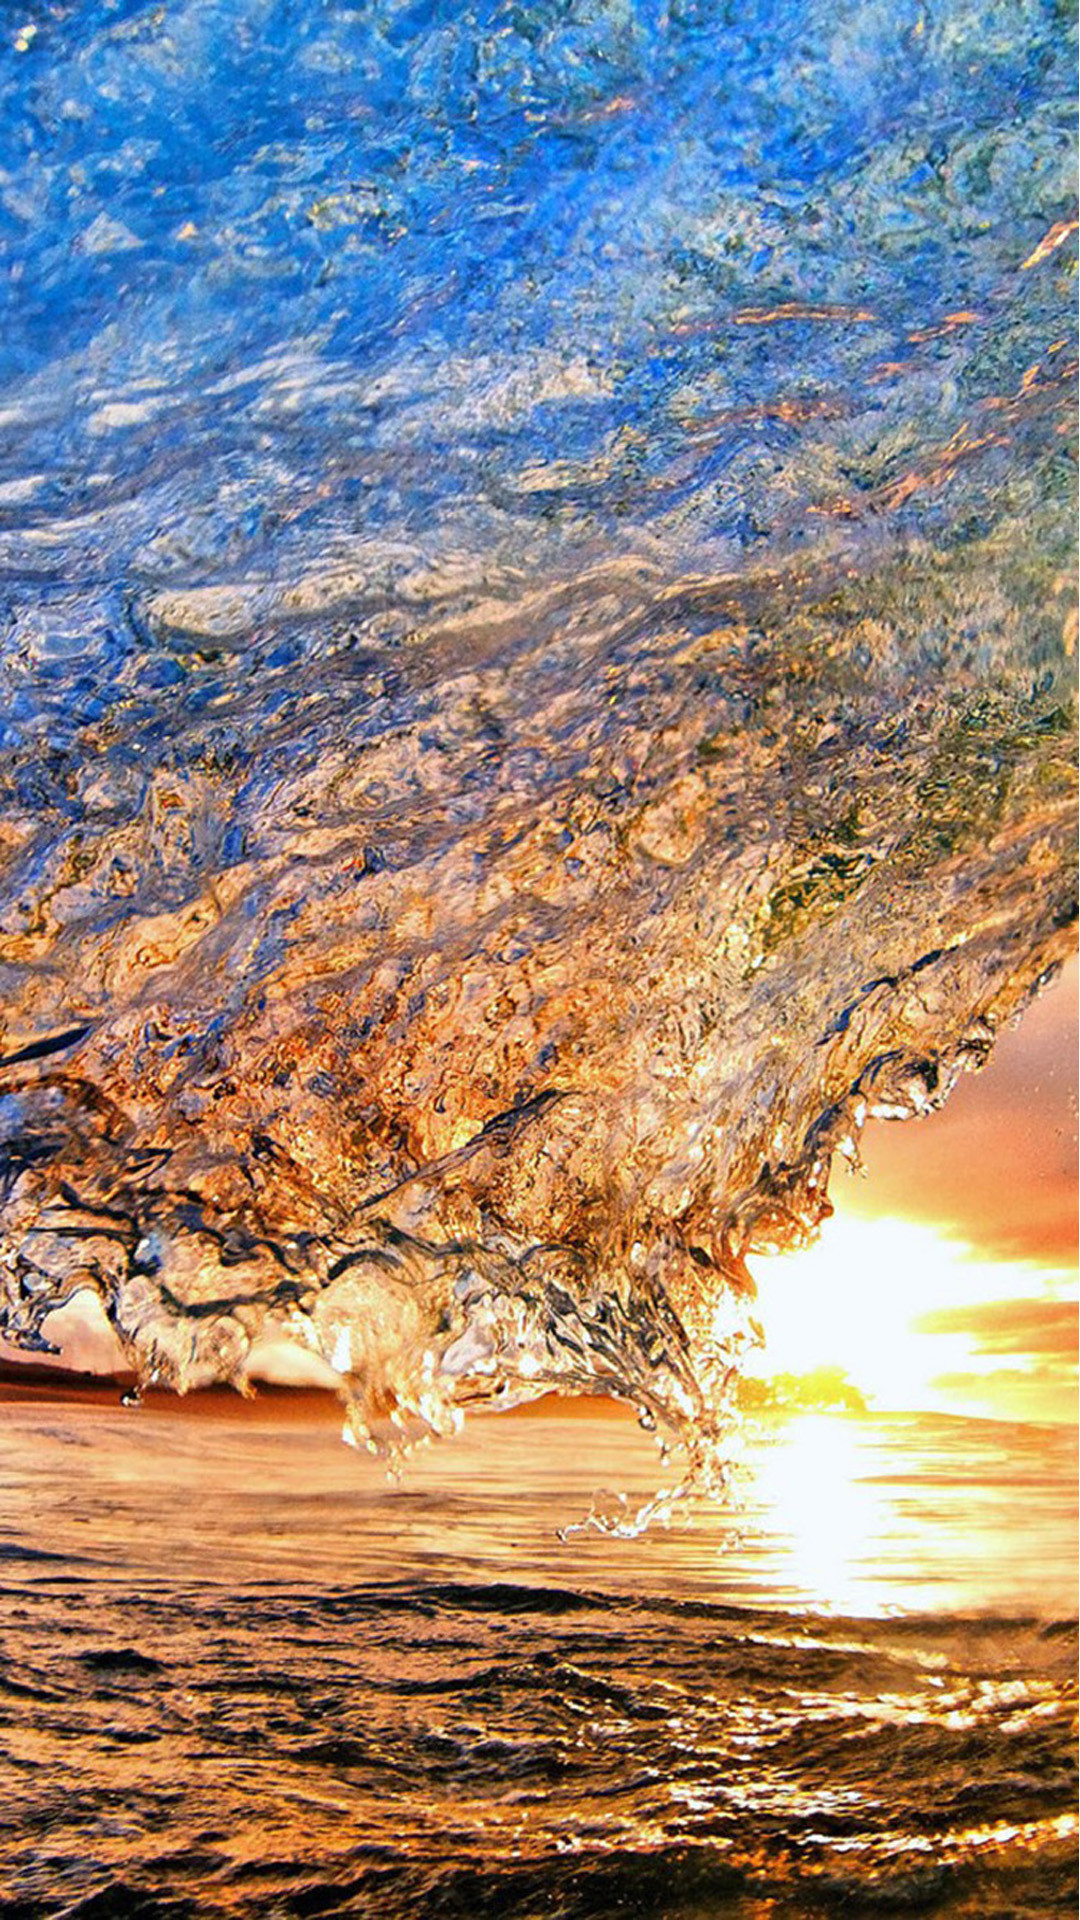 1080x1920 Coolest 77 Beach Wallpaper Hd Iphone 6 For Desktop PC laptop Android  Desktop Iphone and Tablet